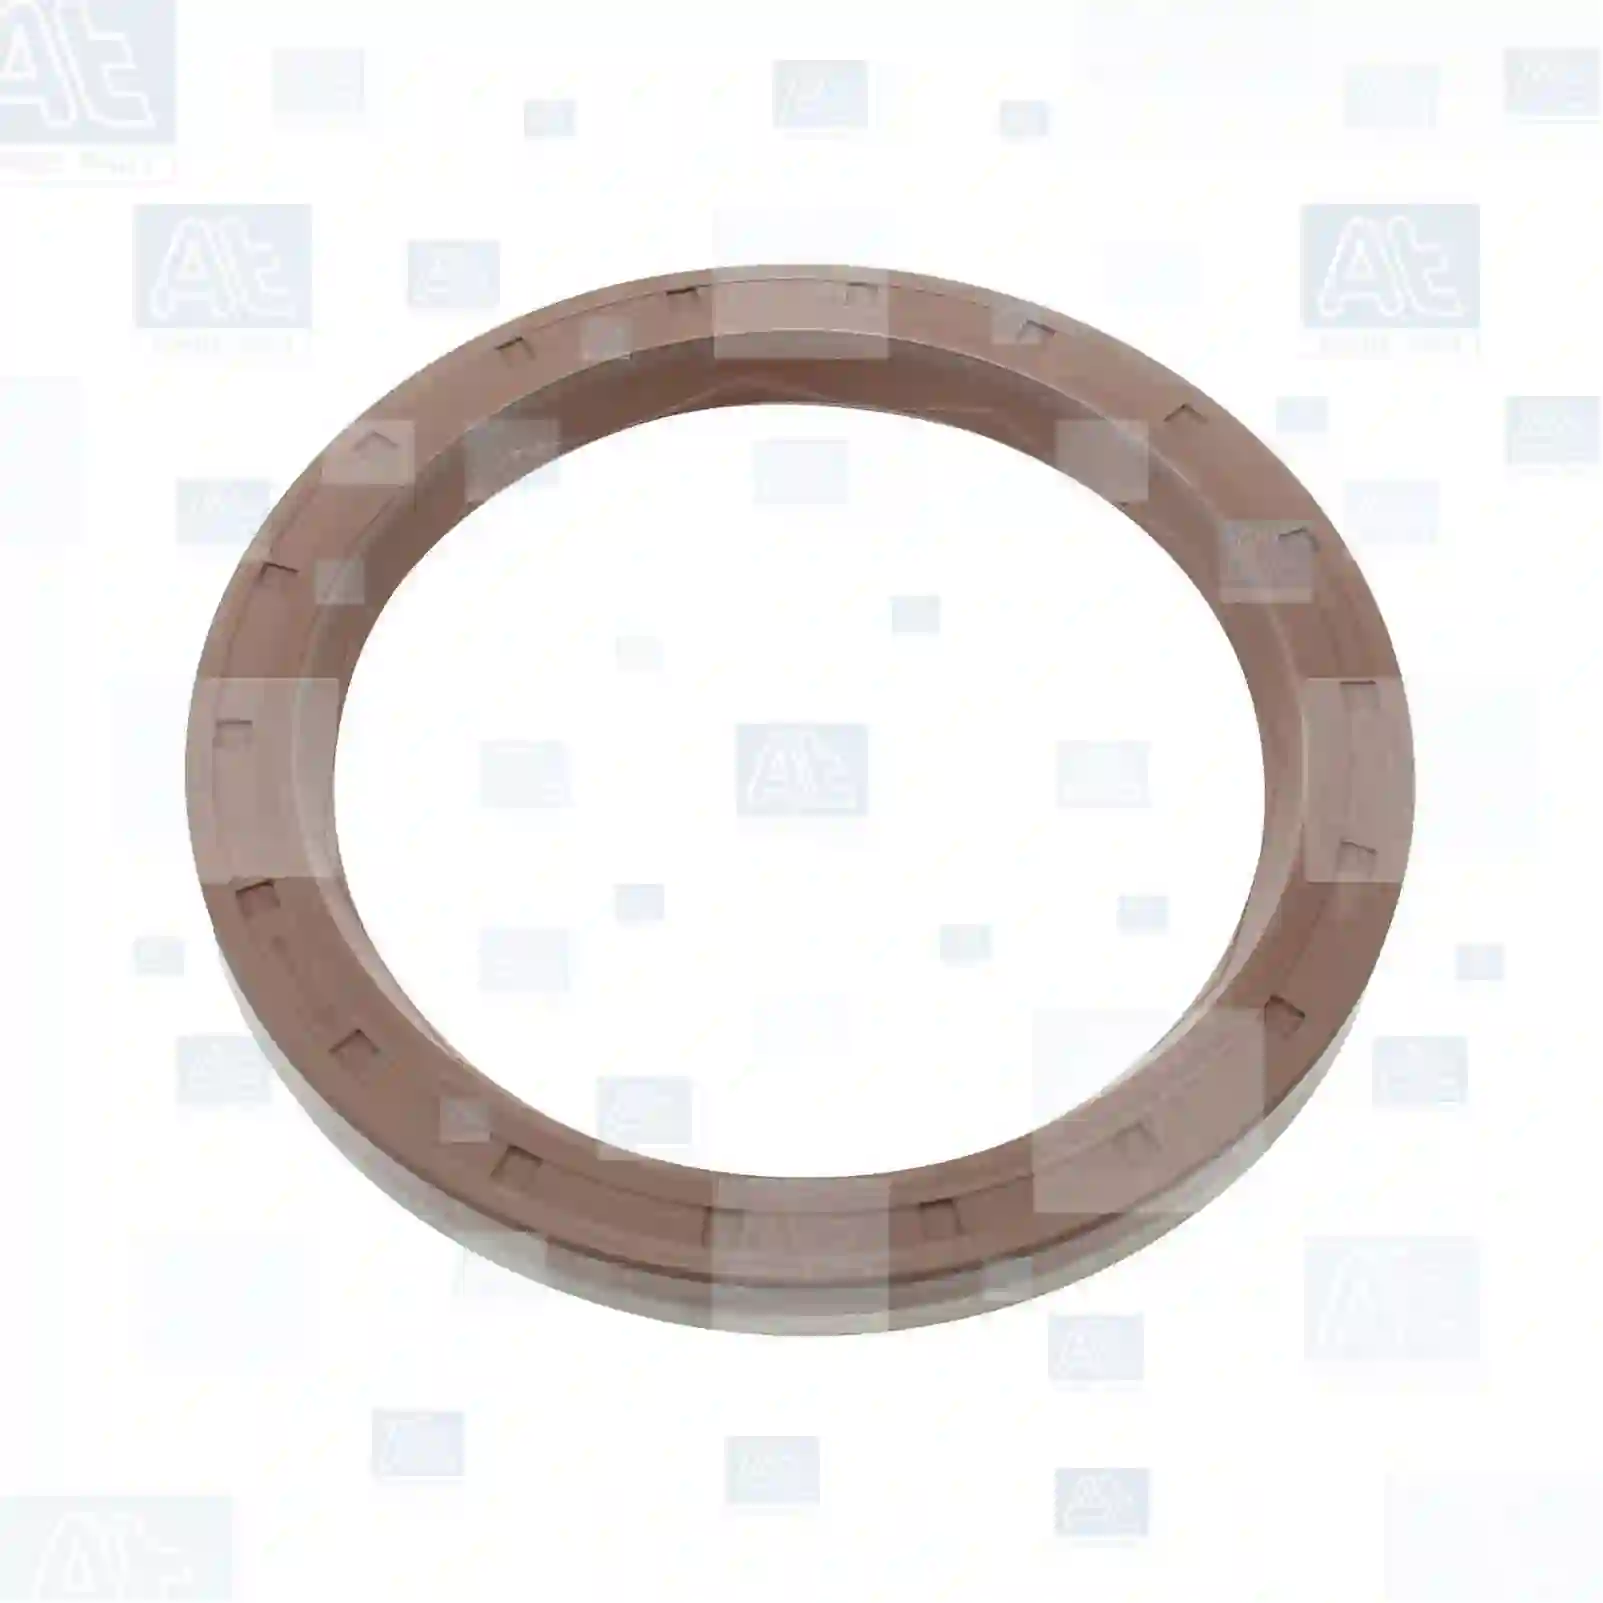 Oil seal, at no 77730318, oem no: 11141264431, 11141265431, 11141271081, 11141274346, 11141275466, 11141736932, ZC9612552U, 90487889, 1275466, 06562714015, 06562790214, 06562790215, 06562790331, 81965020245, 0059970947, 0059971147, 0059971947, 0079974747, 0079975147, 0099971446, 0109972847, 0109974247, 0149974346, 0179973147, 682269, ZC9612552U, LUF000010, 059103085A, 059103085B, 059103085E, ZG02704-0008 At Spare Part | Engine, Accelerator Pedal, Camshaft, Connecting Rod, Crankcase, Crankshaft, Cylinder Head, Engine Suspension Mountings, Exhaust Manifold, Exhaust Gas Recirculation, Filter Kits, Flywheel Housing, General Overhaul Kits, Engine, Intake Manifold, Oil Cleaner, Oil Cooler, Oil Filter, Oil Pump, Oil Sump, Piston & Liner, Sensor & Switch, Timing Case, Turbocharger, Cooling System, Belt Tensioner, Coolant Filter, Coolant Pipe, Corrosion Prevention Agent, Drive, Expansion Tank, Fan, Intercooler, Monitors & Gauges, Radiator, Thermostat, V-Belt / Timing belt, Water Pump, Fuel System, Electronical Injector Unit, Feed Pump, Fuel Filter, cpl., Fuel Gauge Sender,  Fuel Line, Fuel Pump, Fuel Tank, Injection Line Kit, Injection Pump, Exhaust System, Clutch & Pedal, Gearbox, Propeller Shaft, Axles, Brake System, Hubs & Wheels, Suspension, Leaf Spring, Universal Parts / Accessories, Steering, Electrical System, Cabin Oil seal, at no 77730318, oem no: 11141264431, 11141265431, 11141271081, 11141274346, 11141275466, 11141736932, ZC9612552U, 90487889, 1275466, 06562714015, 06562790214, 06562790215, 06562790331, 81965020245, 0059970947, 0059971147, 0059971947, 0079974747, 0079975147, 0099971446, 0109972847, 0109974247, 0149974346, 0179973147, 682269, ZC9612552U, LUF000010, 059103085A, 059103085B, 059103085E, ZG02704-0008 At Spare Part | Engine, Accelerator Pedal, Camshaft, Connecting Rod, Crankcase, Crankshaft, Cylinder Head, Engine Suspension Mountings, Exhaust Manifold, Exhaust Gas Recirculation, Filter Kits, Flywheel Housing, General Overhaul Kits, Engine, Intake Manifold, Oil Cleaner, Oil Cooler, Oil Filter, Oil Pump, Oil Sump, Piston & Liner, Sensor & Switch, Timing Case, Turbocharger, Cooling System, Belt Tensioner, Coolant Filter, Coolant Pipe, Corrosion Prevention Agent, Drive, Expansion Tank, Fan, Intercooler, Monitors & Gauges, Radiator, Thermostat, V-Belt / Timing belt, Water Pump, Fuel System, Electronical Injector Unit, Feed Pump, Fuel Filter, cpl., Fuel Gauge Sender,  Fuel Line, Fuel Pump, Fuel Tank, Injection Line Kit, Injection Pump, Exhaust System, Clutch & Pedal, Gearbox, Propeller Shaft, Axles, Brake System, Hubs & Wheels, Suspension, Leaf Spring, Universal Parts / Accessories, Steering, Electrical System, Cabin